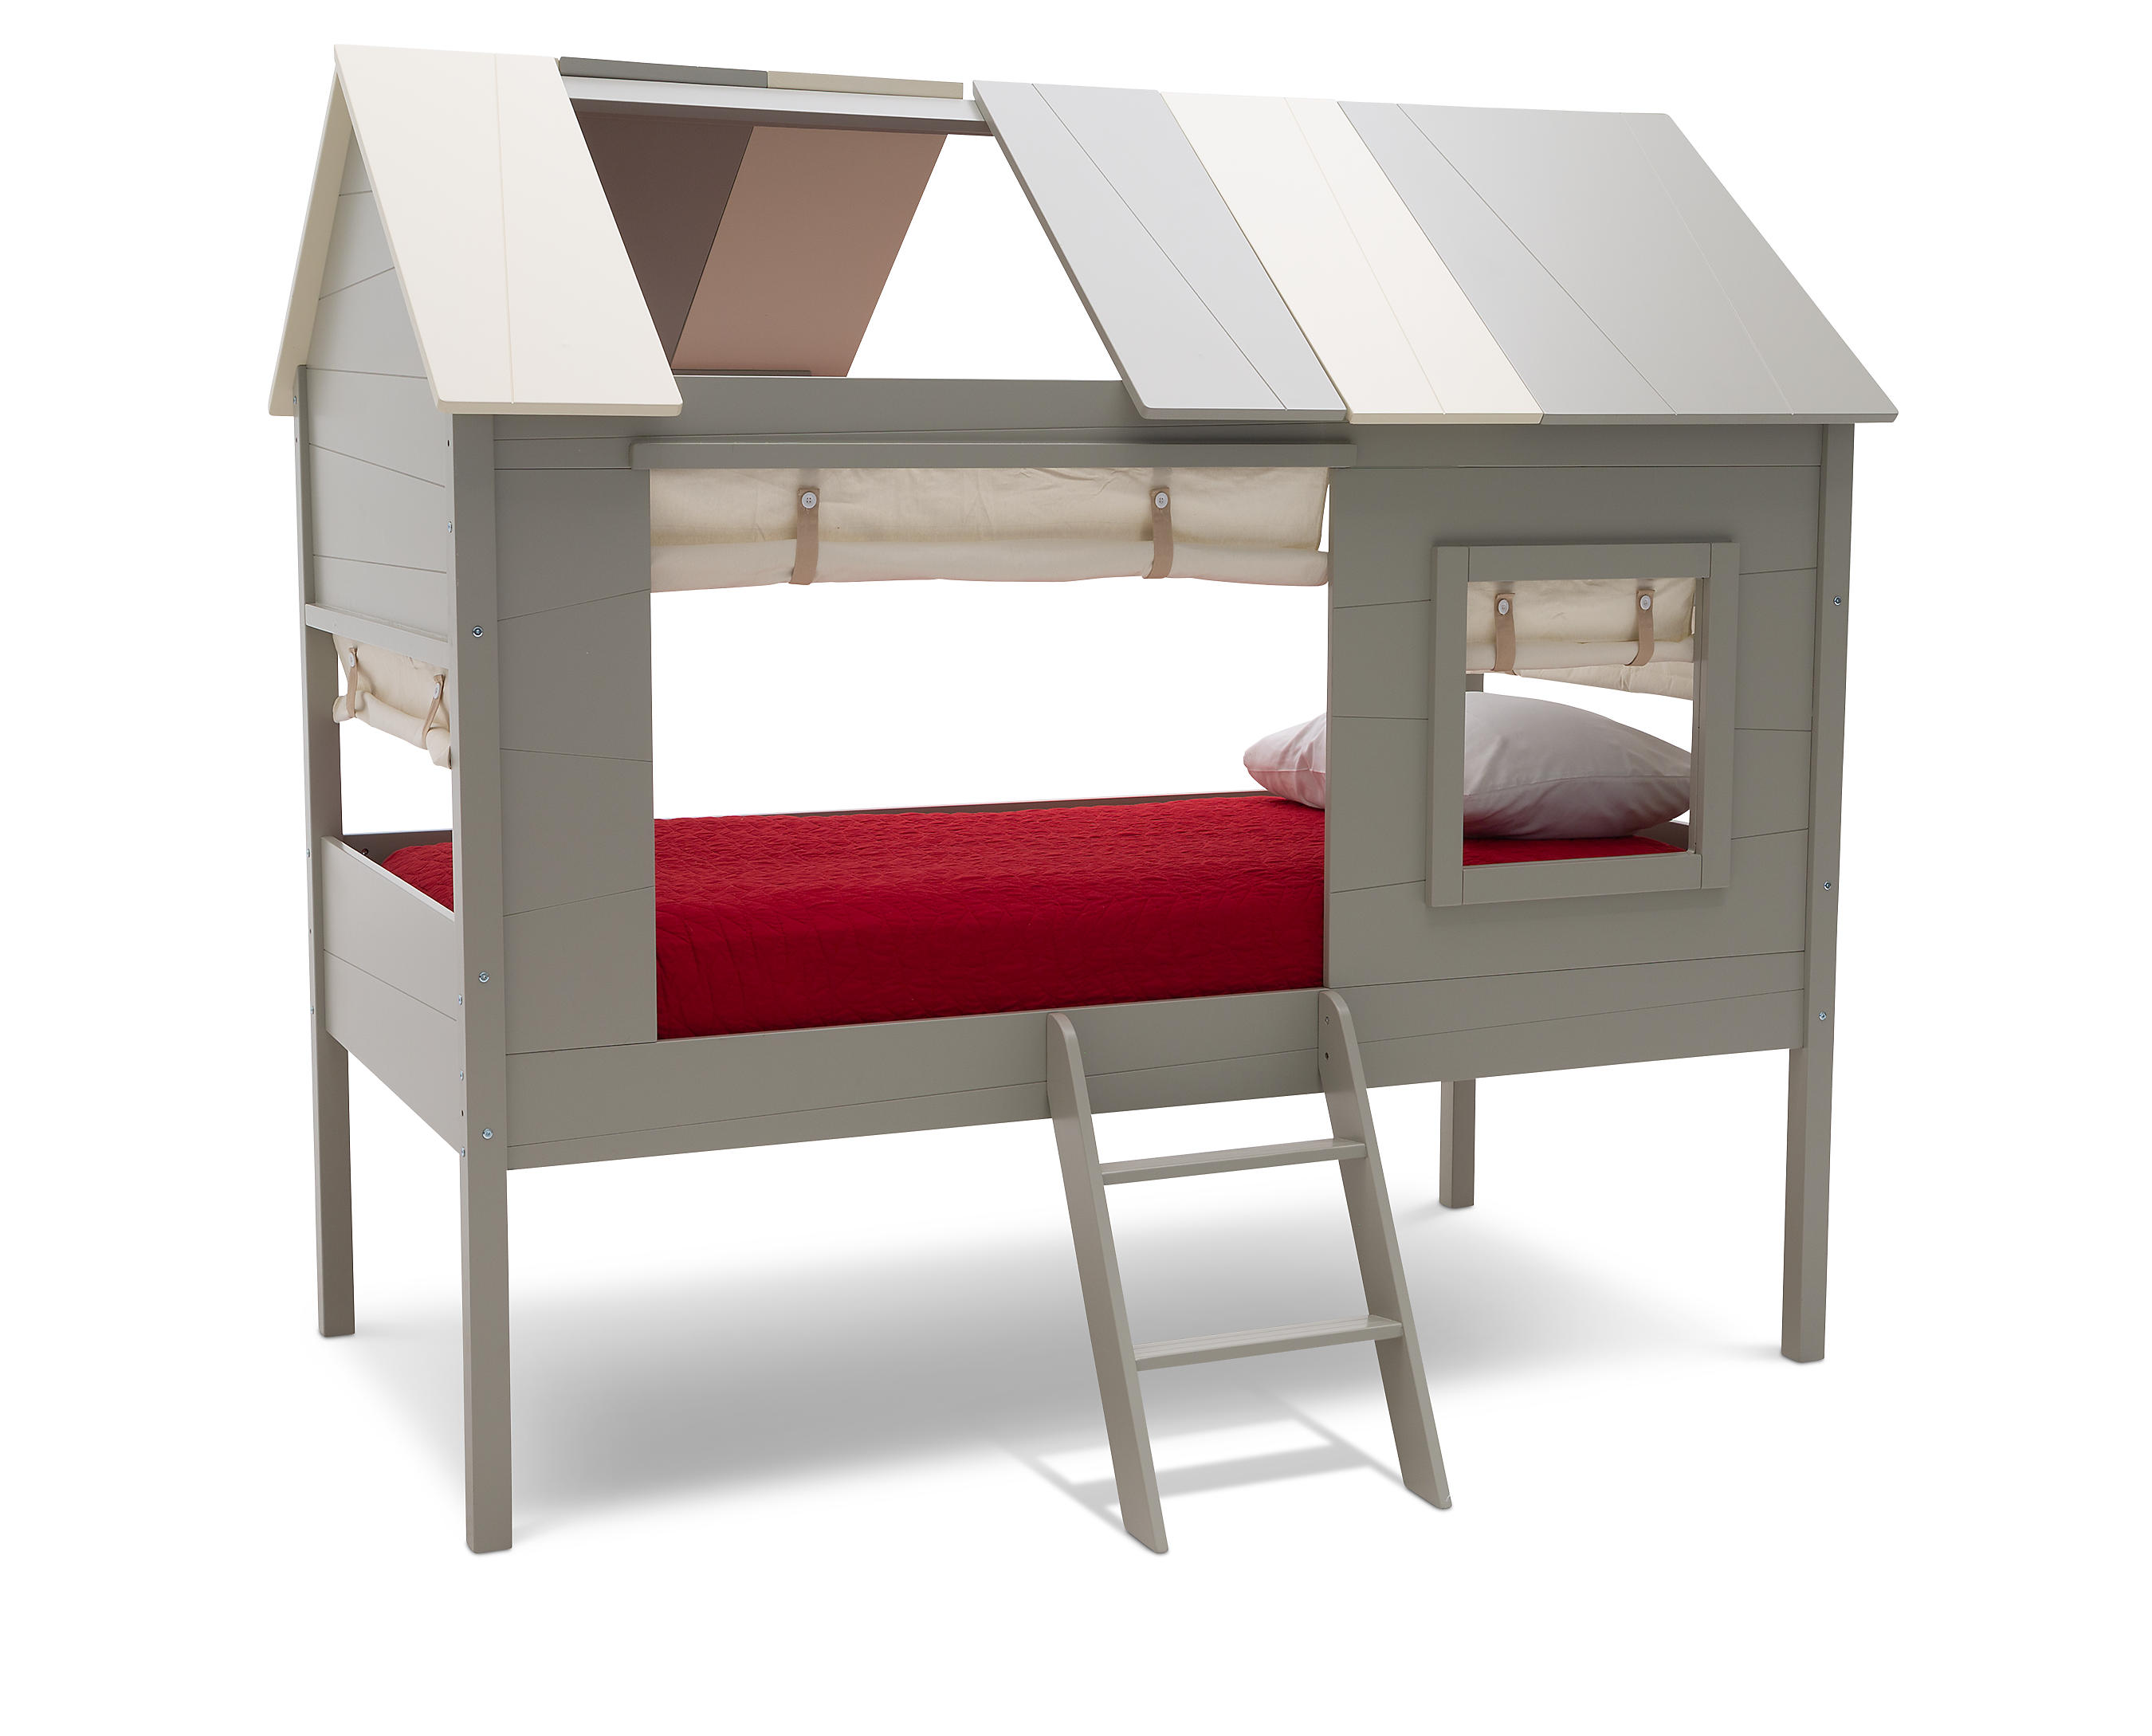 Treehouse Bed Furniture Row, Furniture Row Bunk Beds